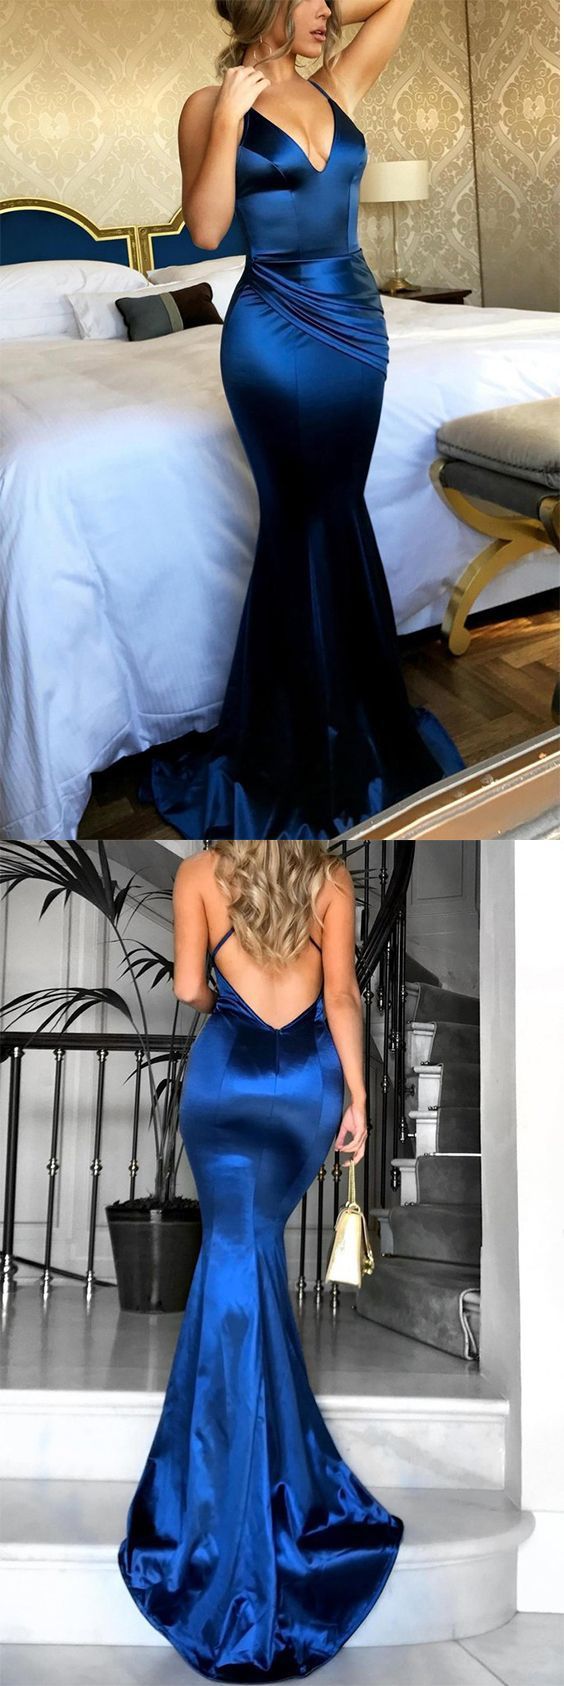 Royal Blue Long Mermaid Evening Gowns Backless V Neck Court Train Prom Dresses  cg634